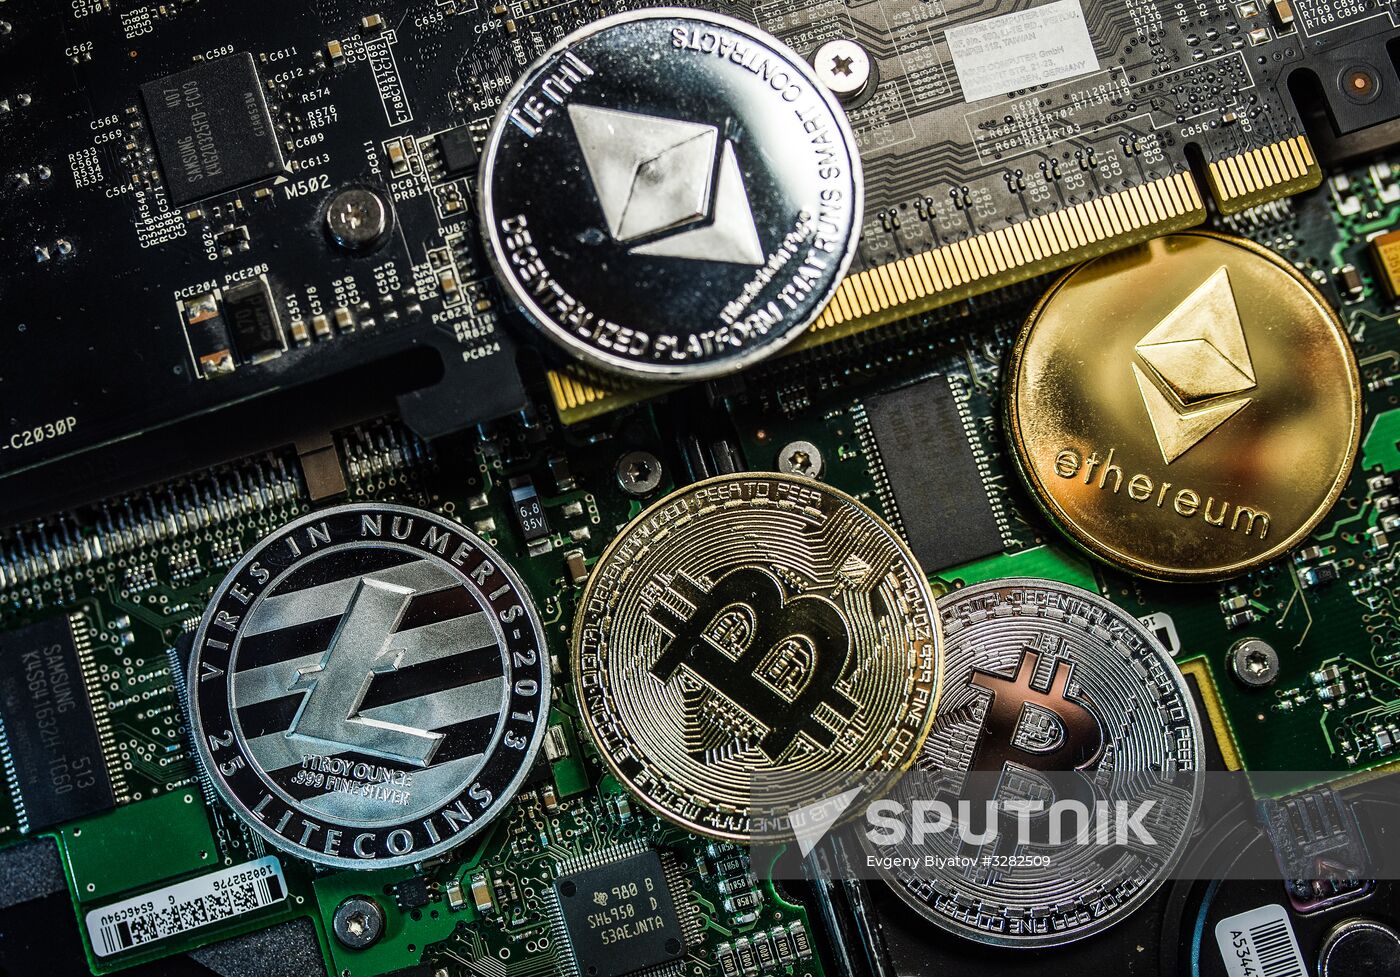 Souvenir coins with cryptocurrency logos